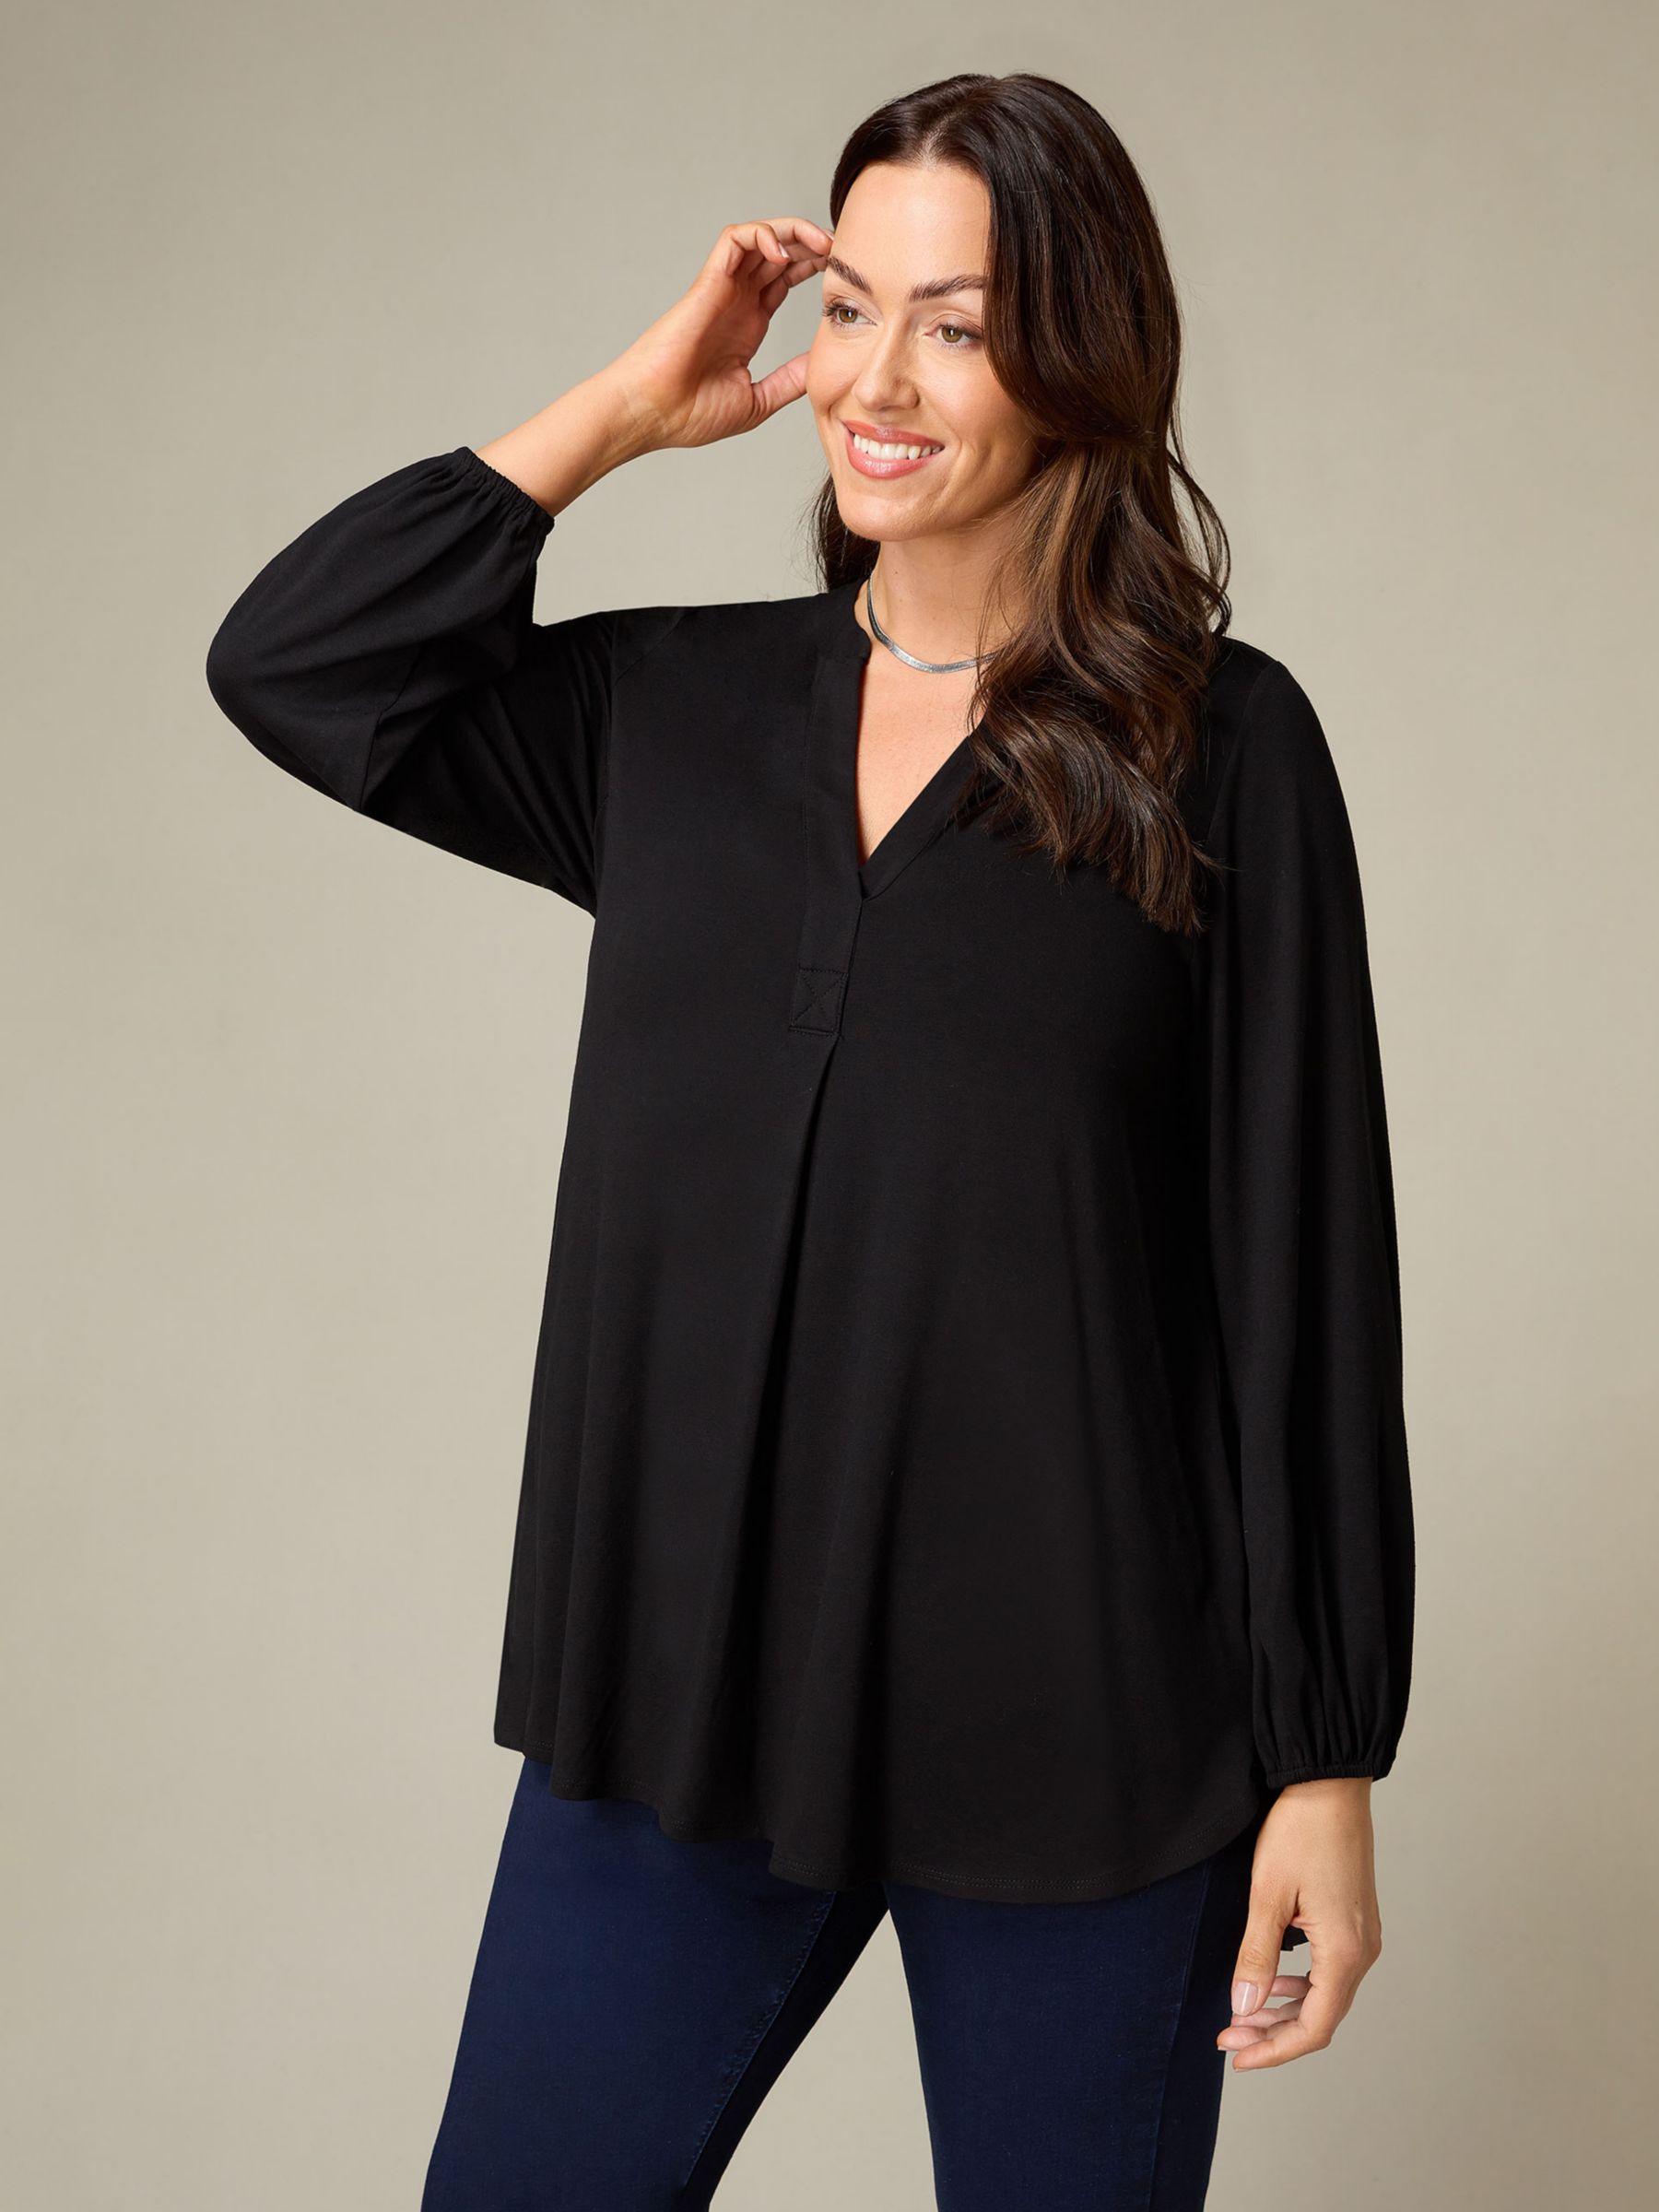 Tunic Sweaters, Shop The Largest Collection